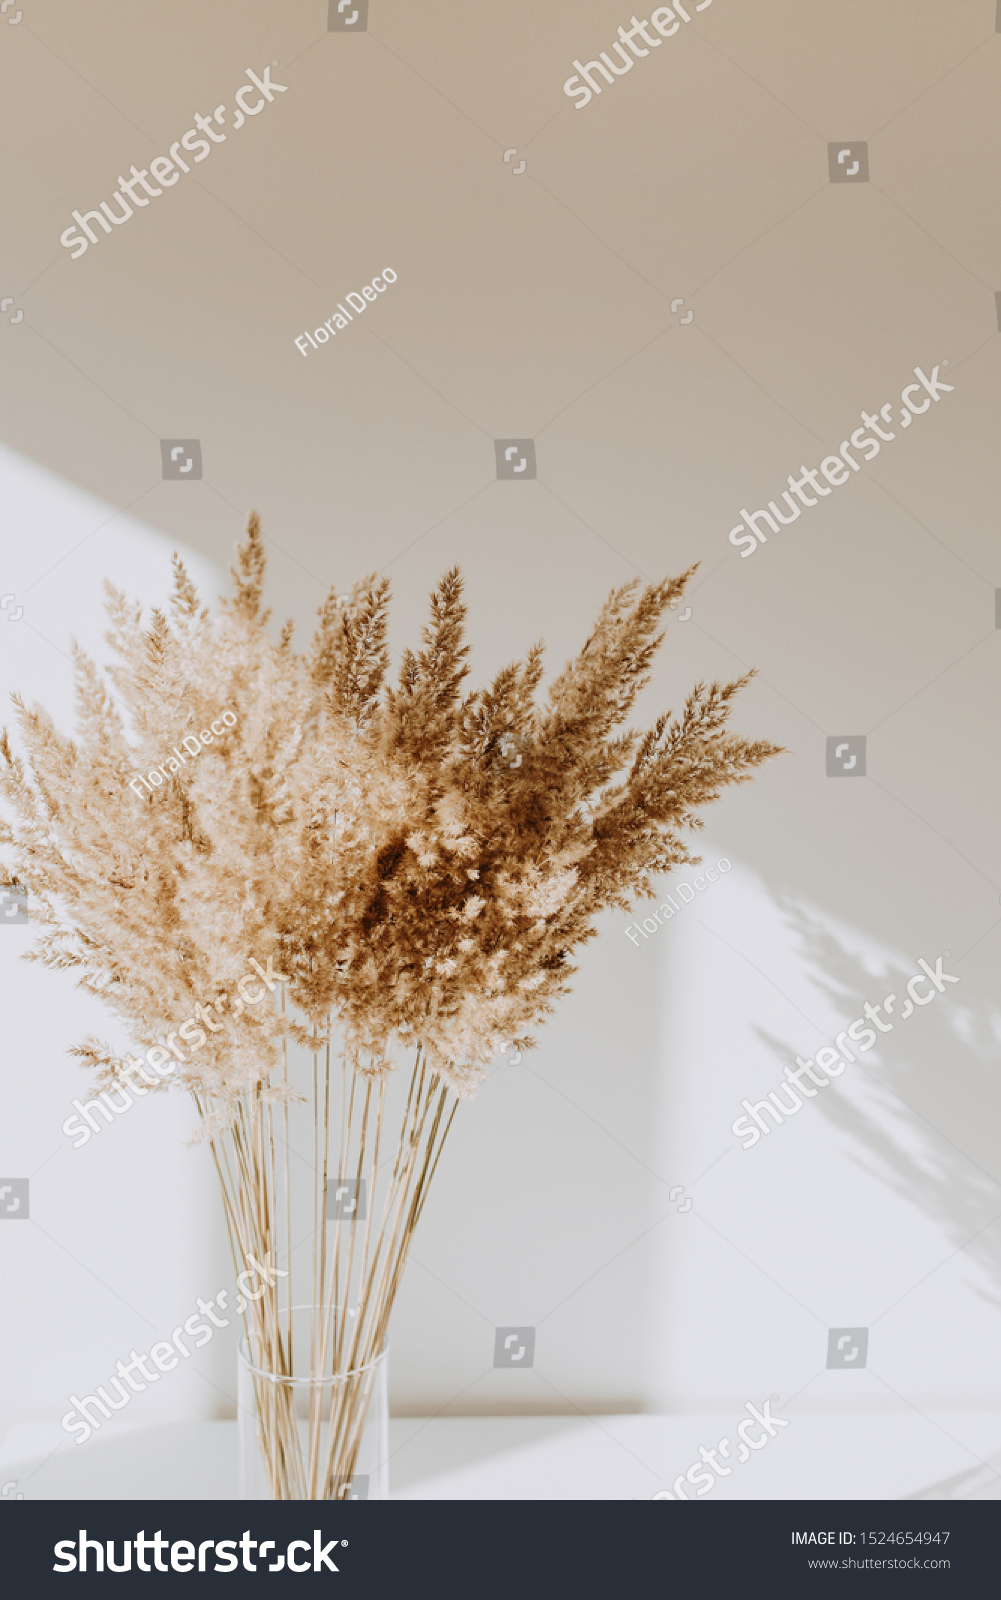 Beige reeds in vase standing on white table with beautiful shadows on the wall. Minimal, styled concept for bloggers. Parisian vibes. #1524654947